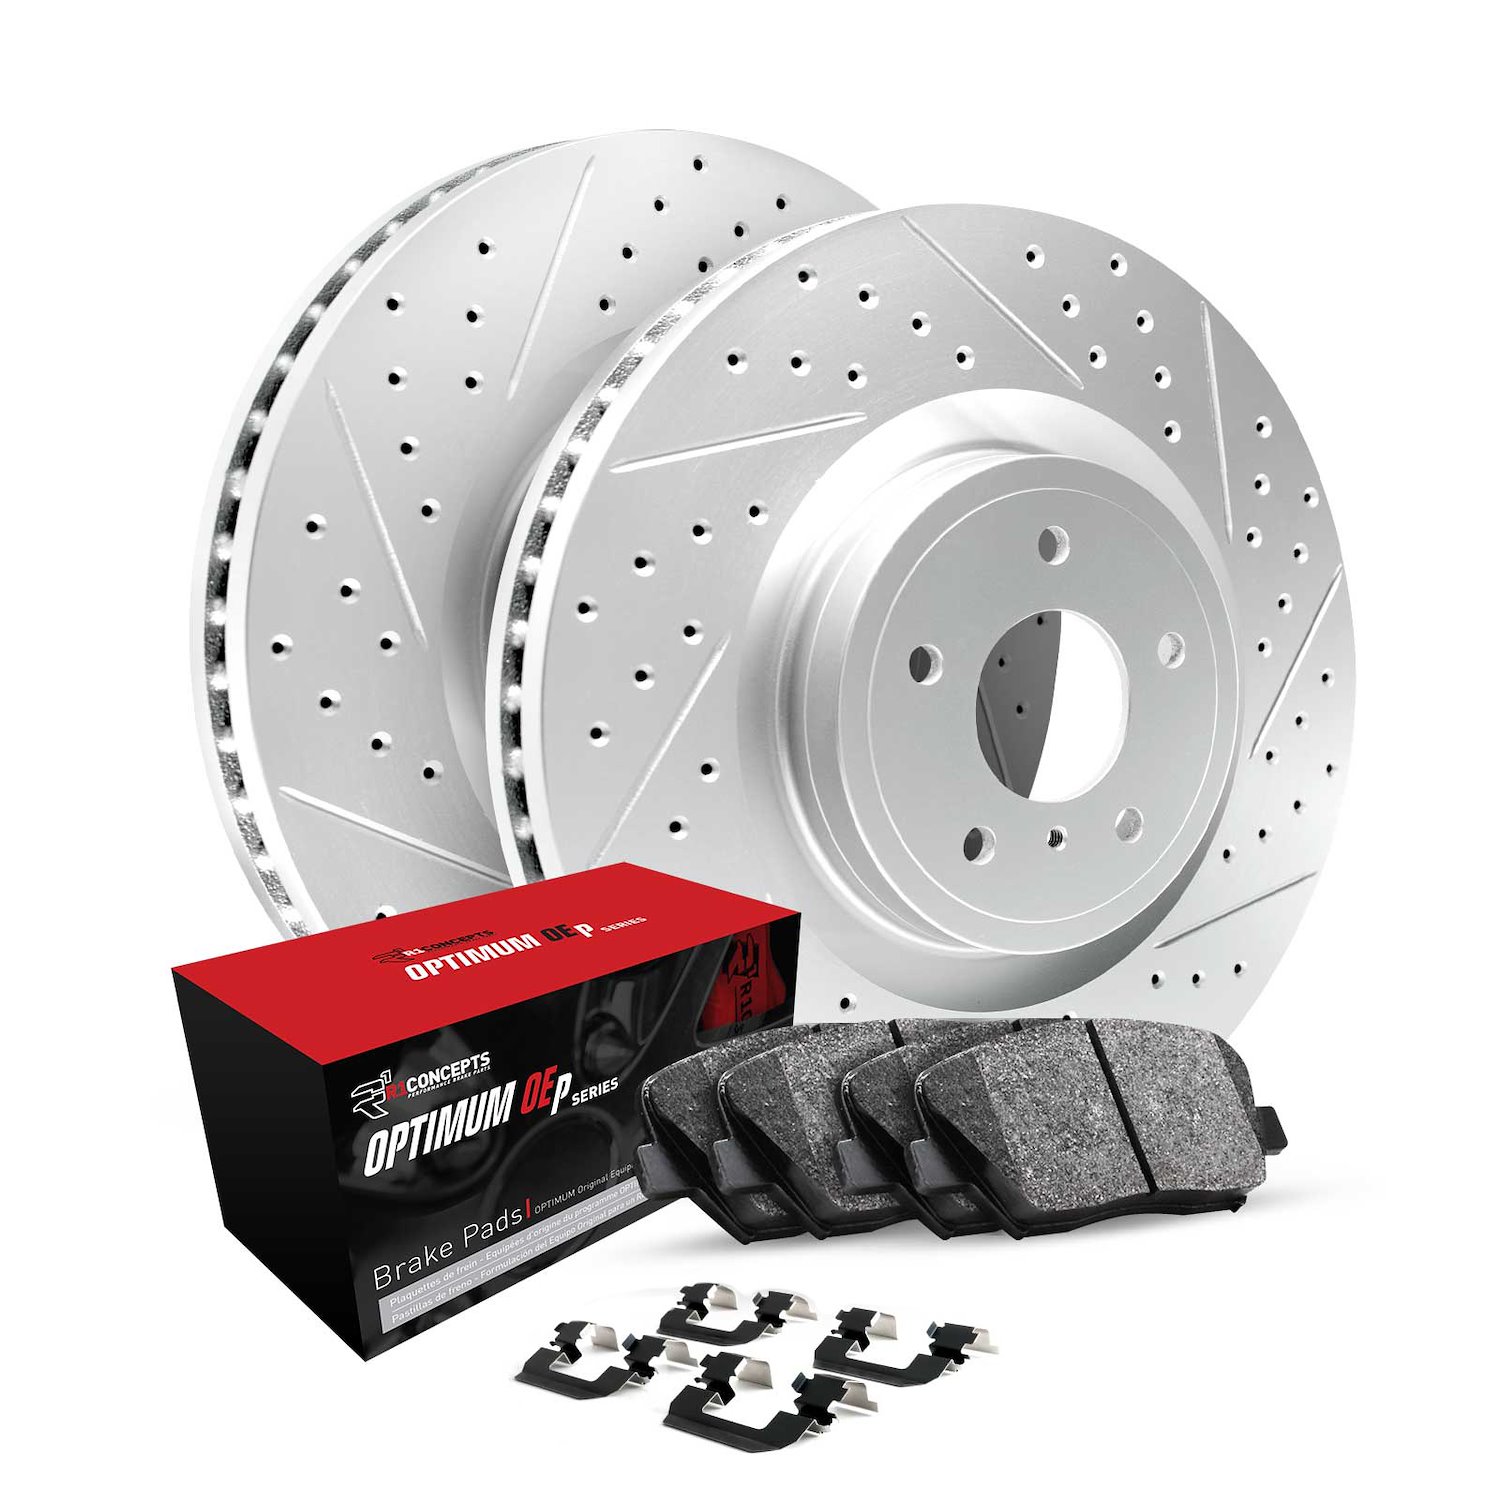 GEO-Carbon Drilled & Slotted Brake Rotor Set w/Optimum OE Pads & Hardware, 1996-2008 Fits Multiple Makes/Models